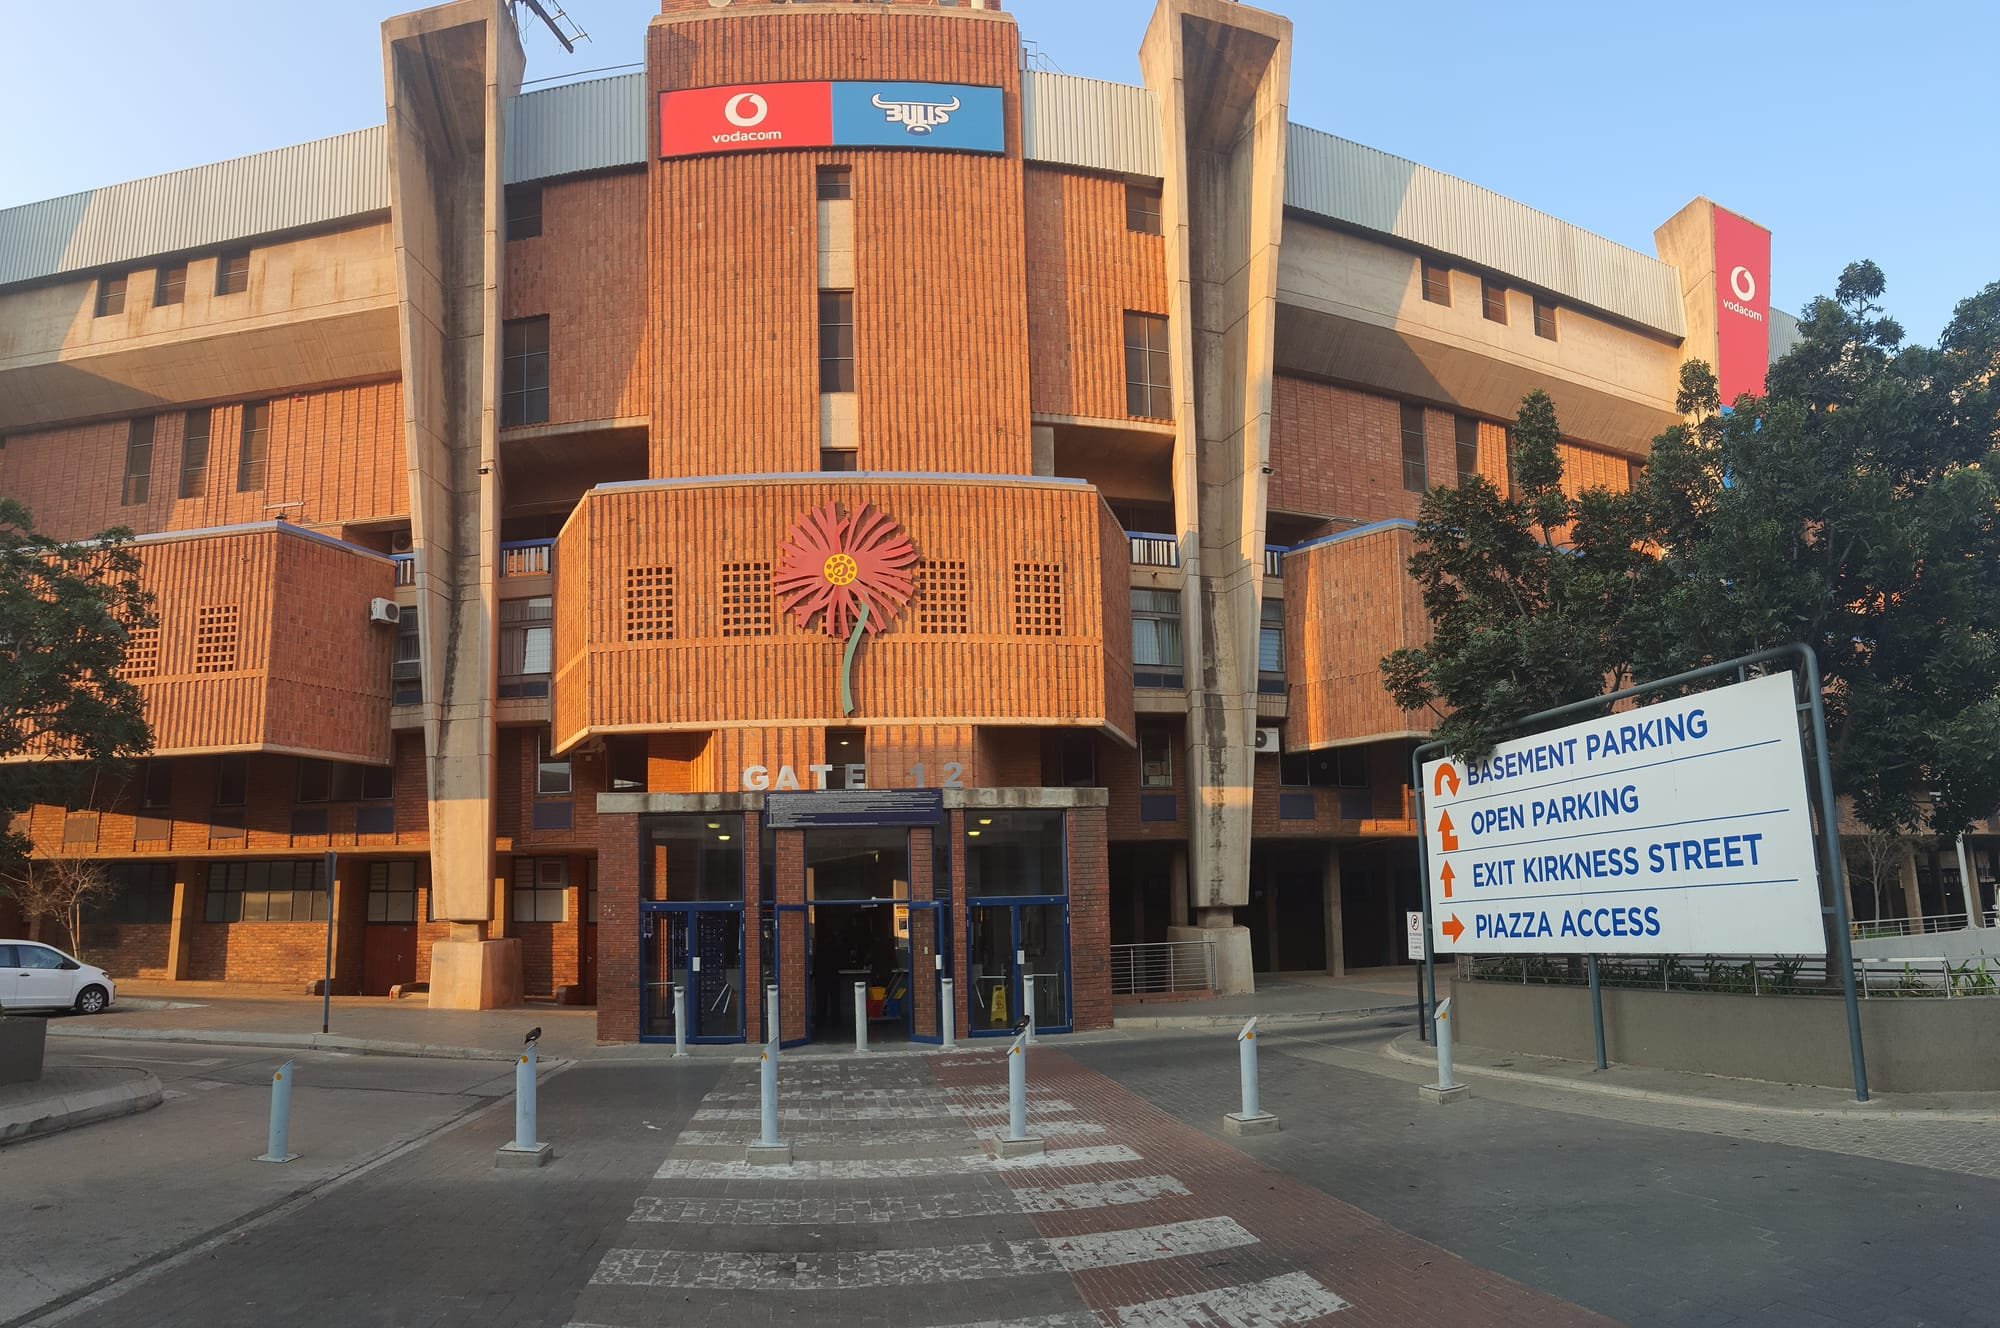 Entrance to our Offices within the Northern Pavilion of Loftus Versveld Stadium